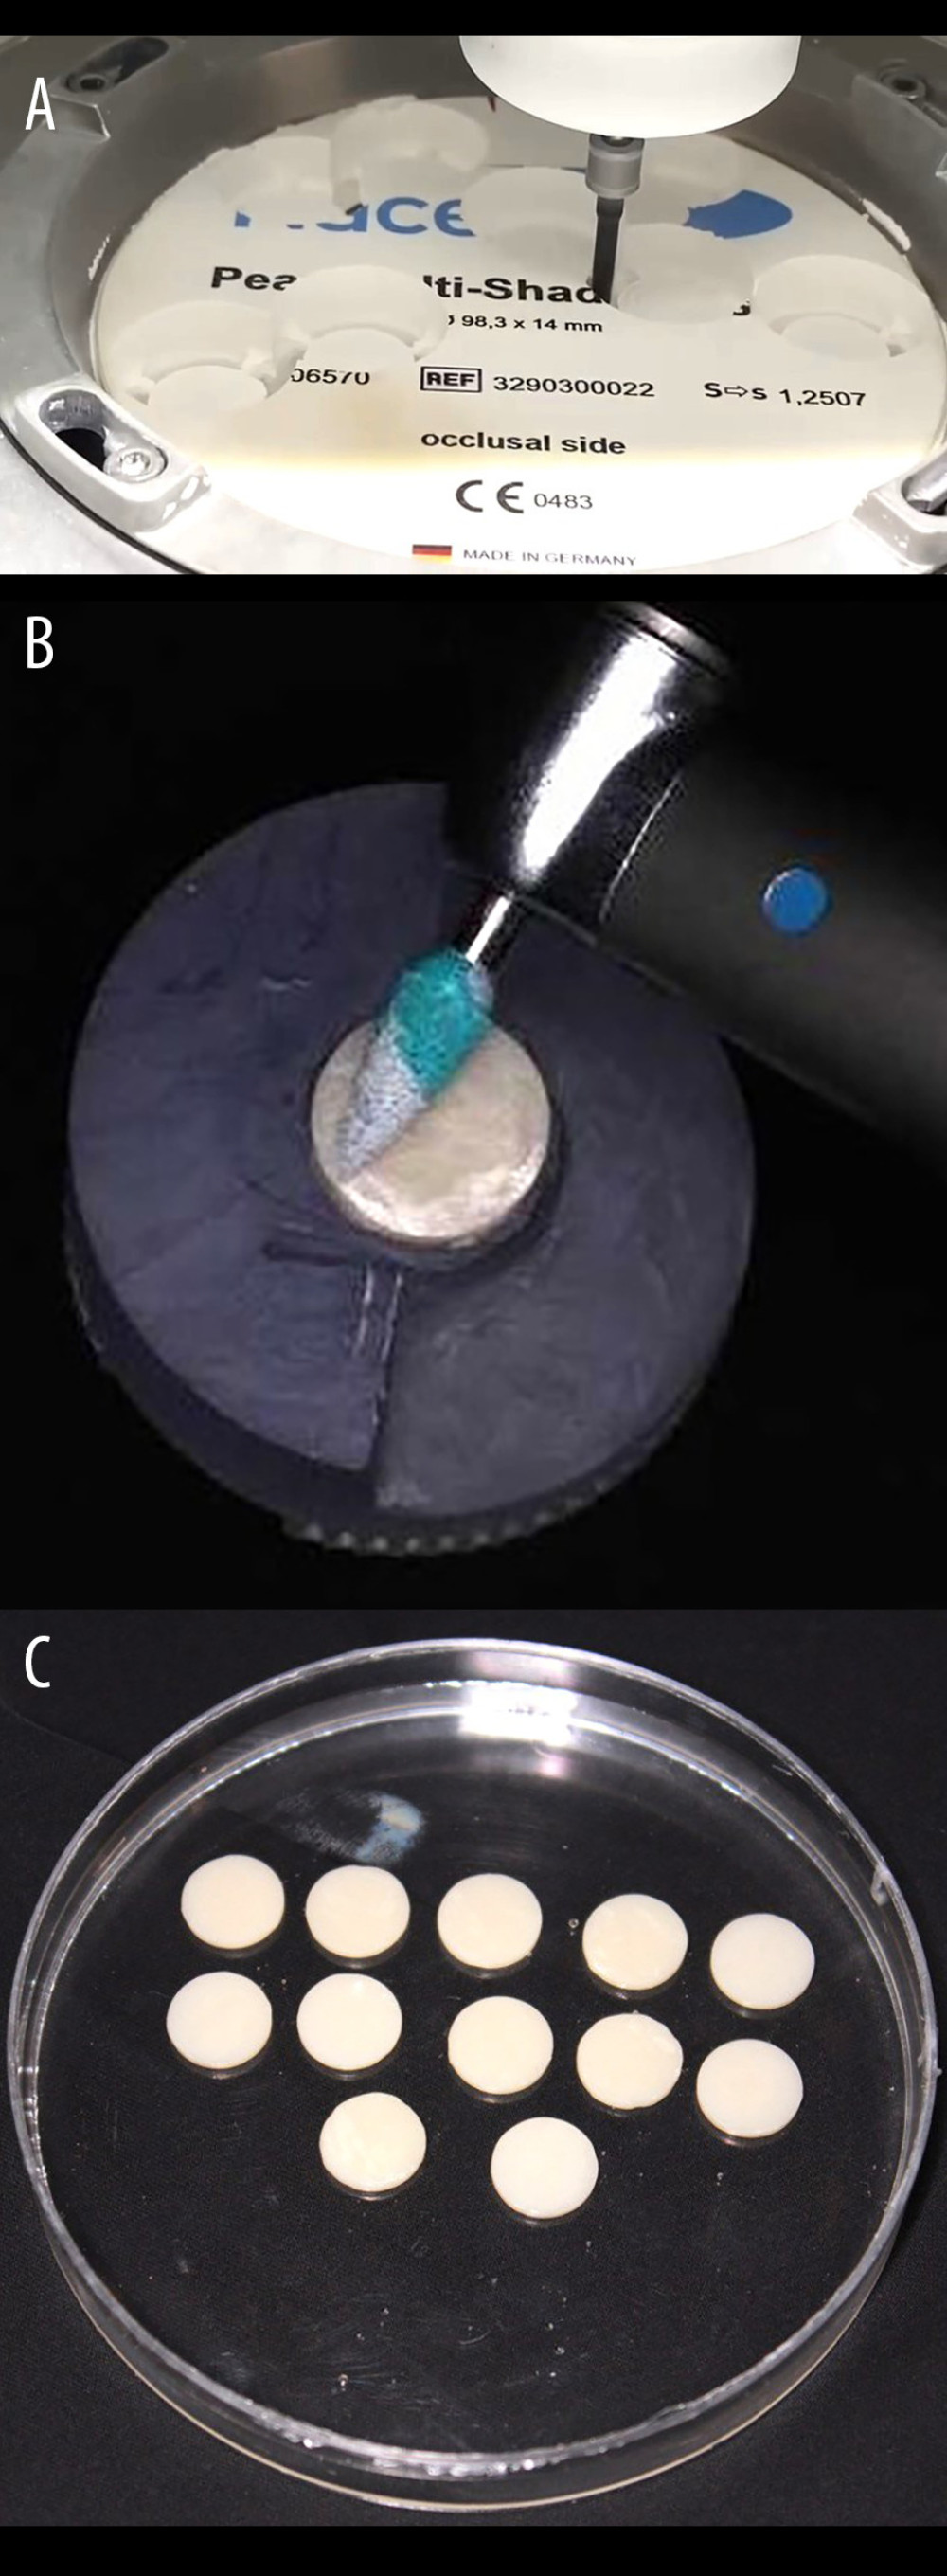 (A) Exemplary disk-shaped specimen preparation from a block of concerned monolithic zirconia ceramic prior to sintering. (B) Exemplary surface adjustment of the adjustment kit on the surface of the specimen prior to polishing with the respective adjustment kit. (C) Finished and polished specimens of a particular individual group before measurement of color and translucency parameter. Photograph taken using a digital single-lens reflex (DSLR) camera (Canon EOS 700D) with 100 mm macro lens) with/without ring flash.